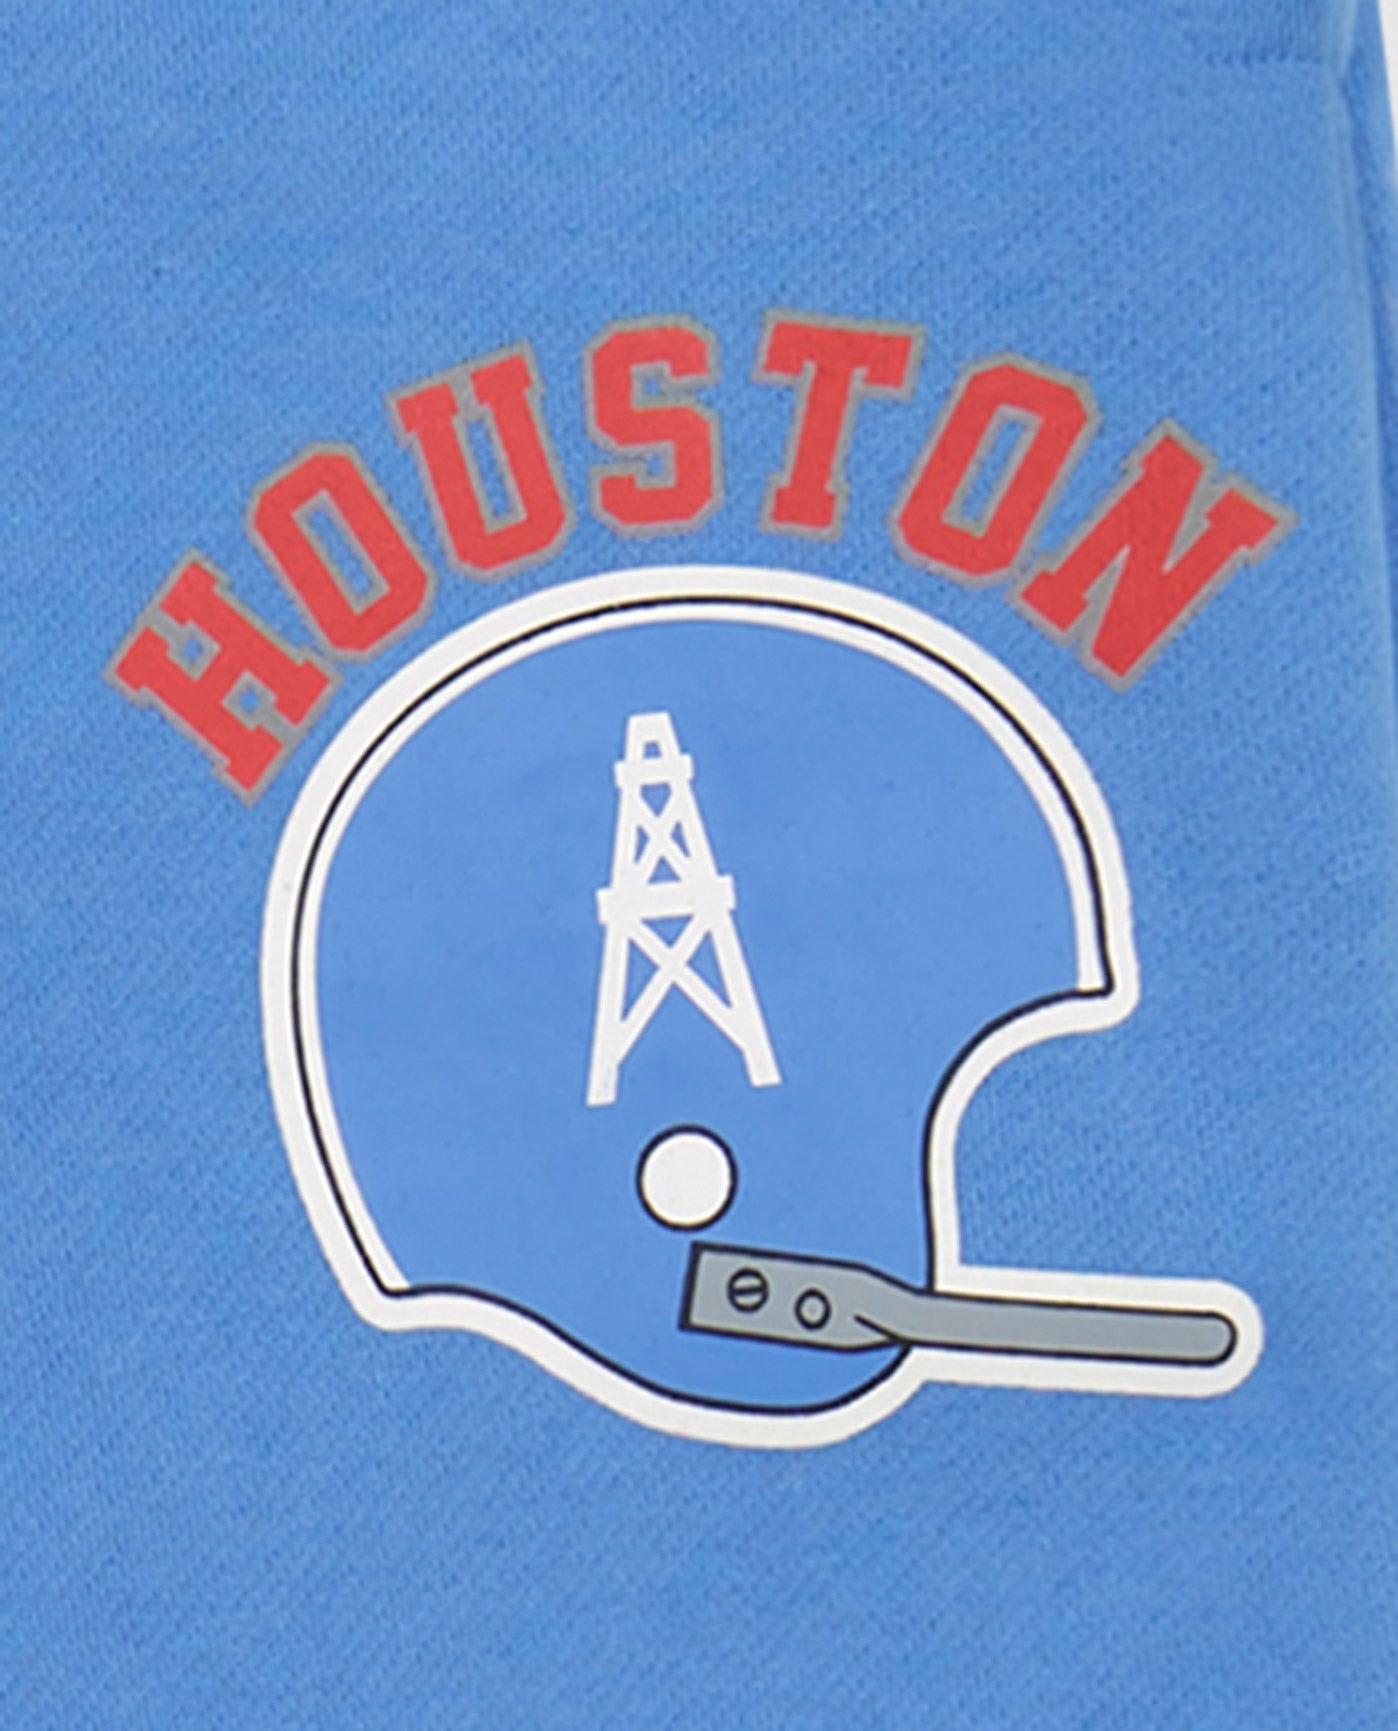 HOUSTON OILERS writing and helmet logo front | Oilers Light Blue